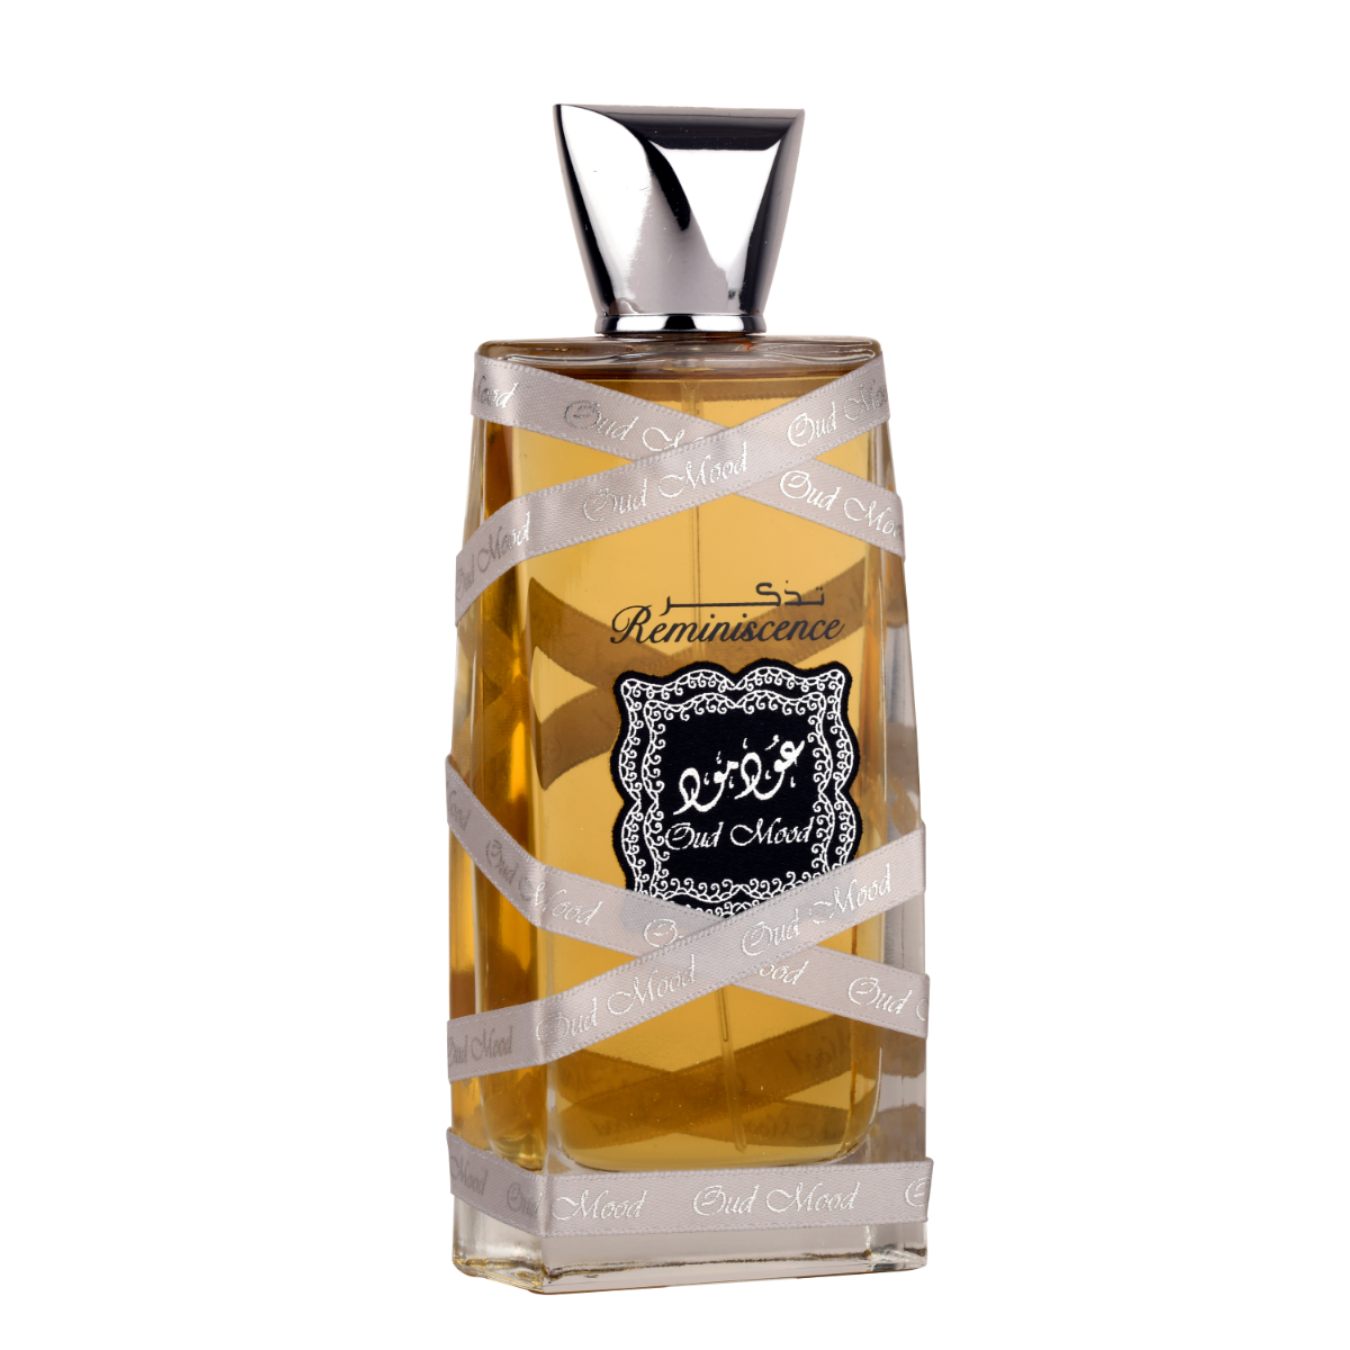 Oud Mood Reminiscence (Silver)